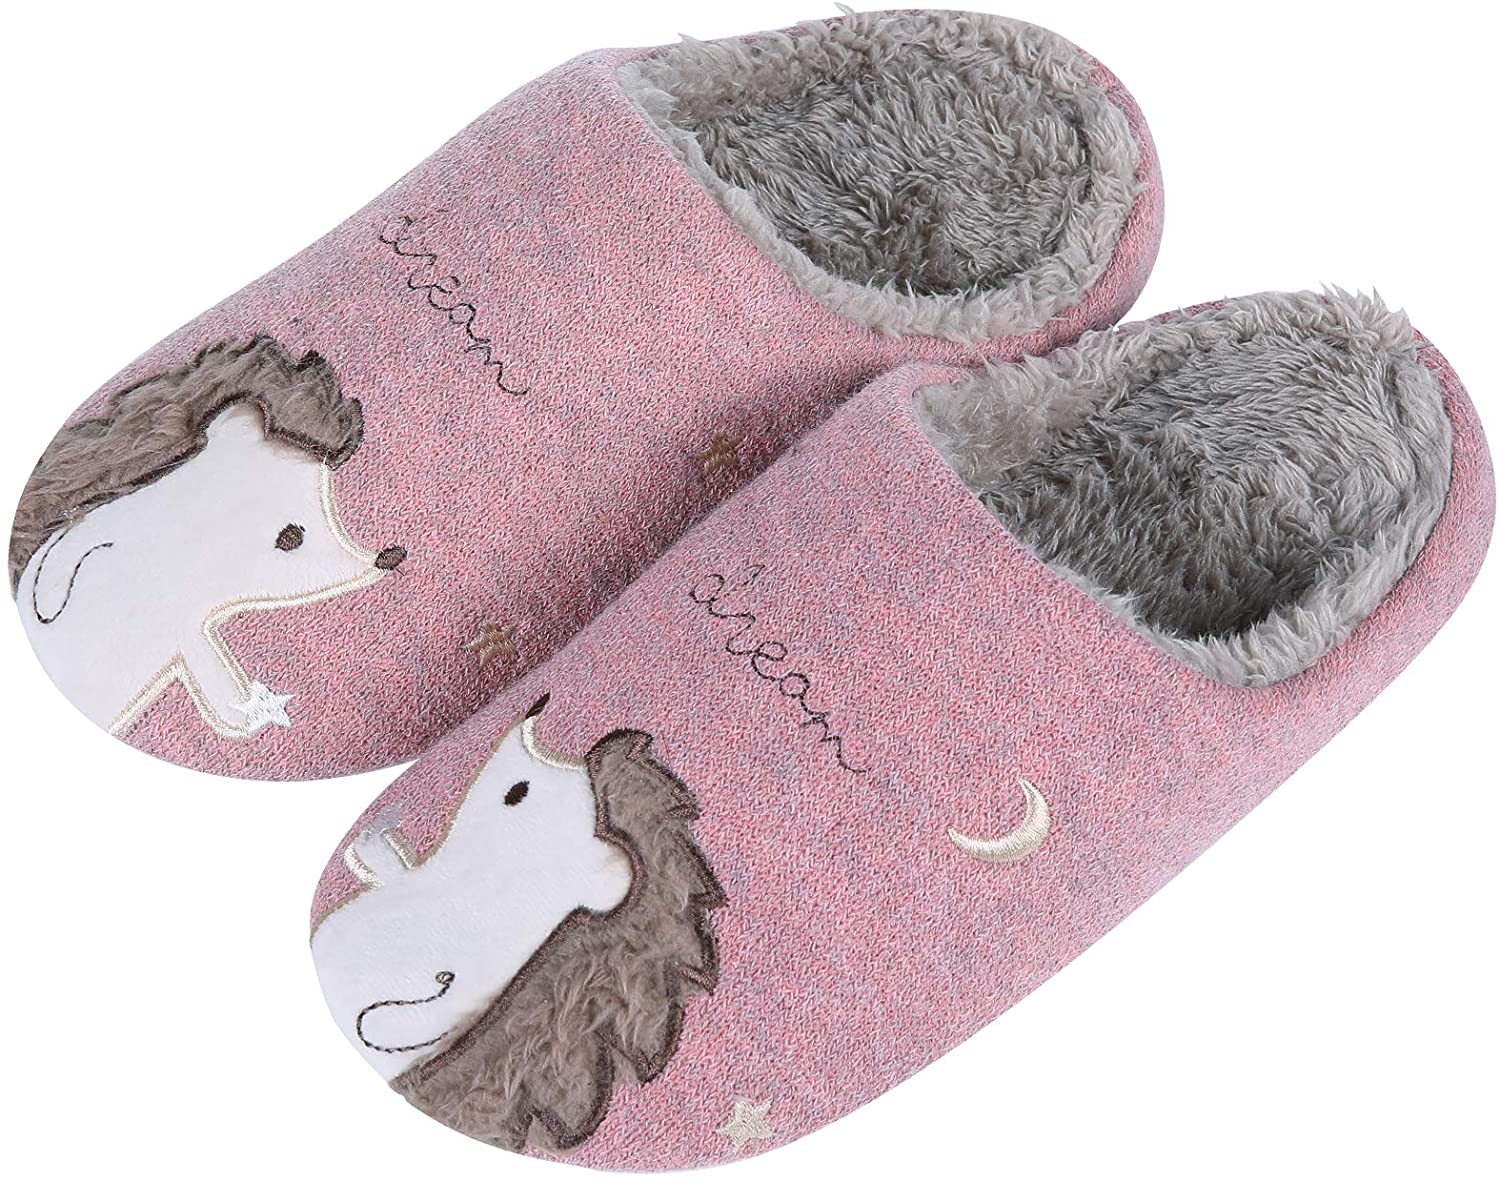 Cute Unicorn House Slippers for Kids Indoor Slippers Waterproof Sole Home Slippers -